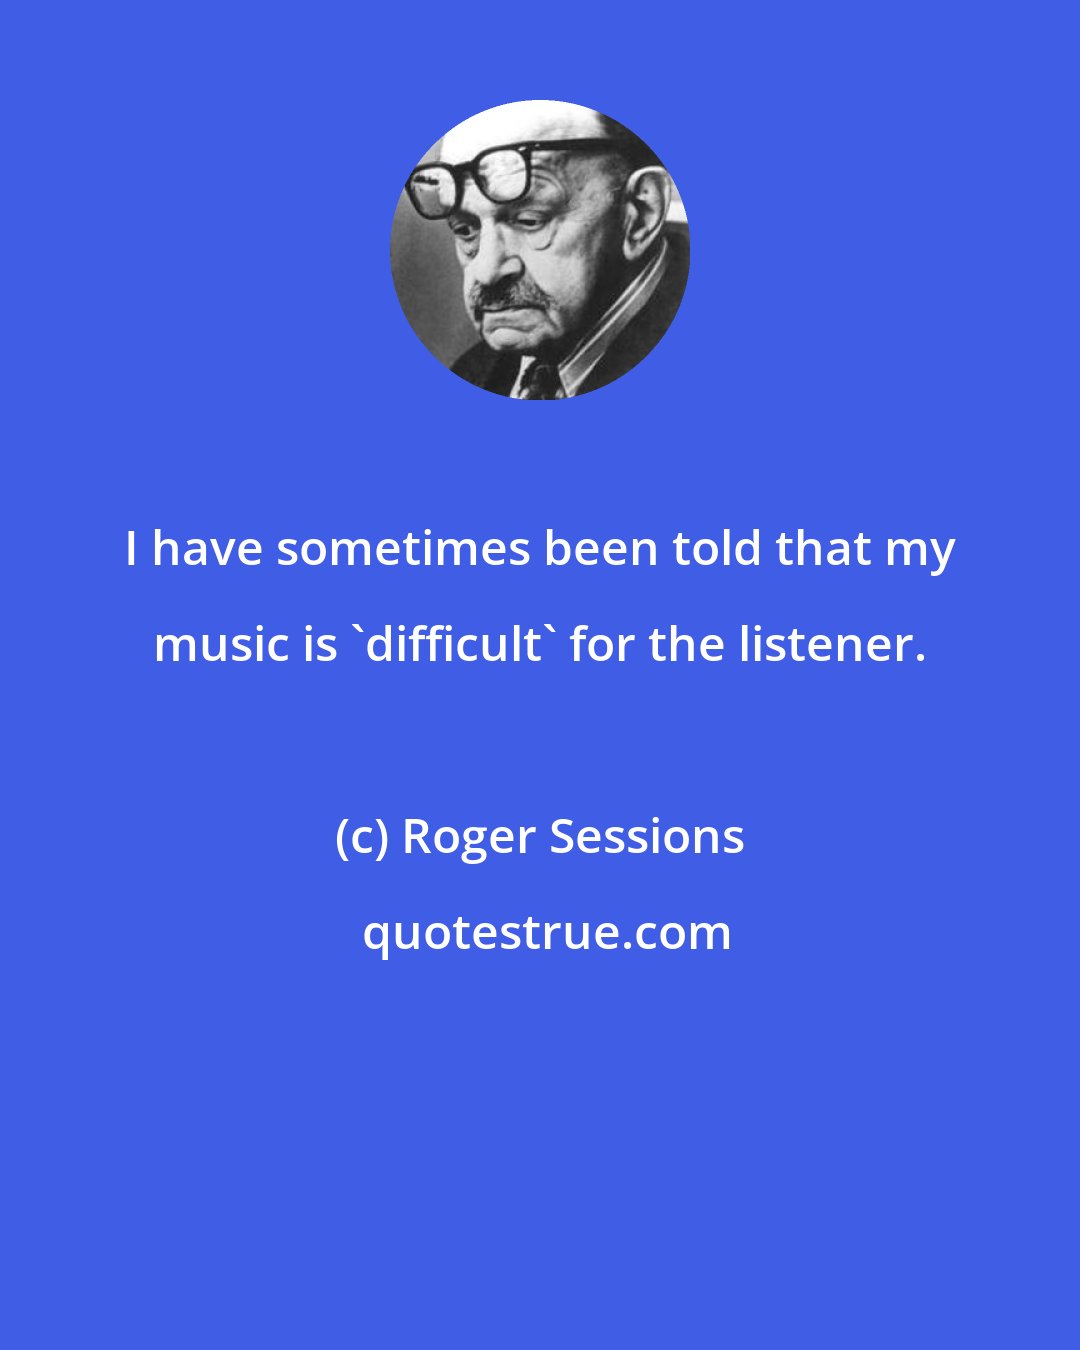 Roger Sessions: I have sometimes been told that my music is 'difficult' for the listener.